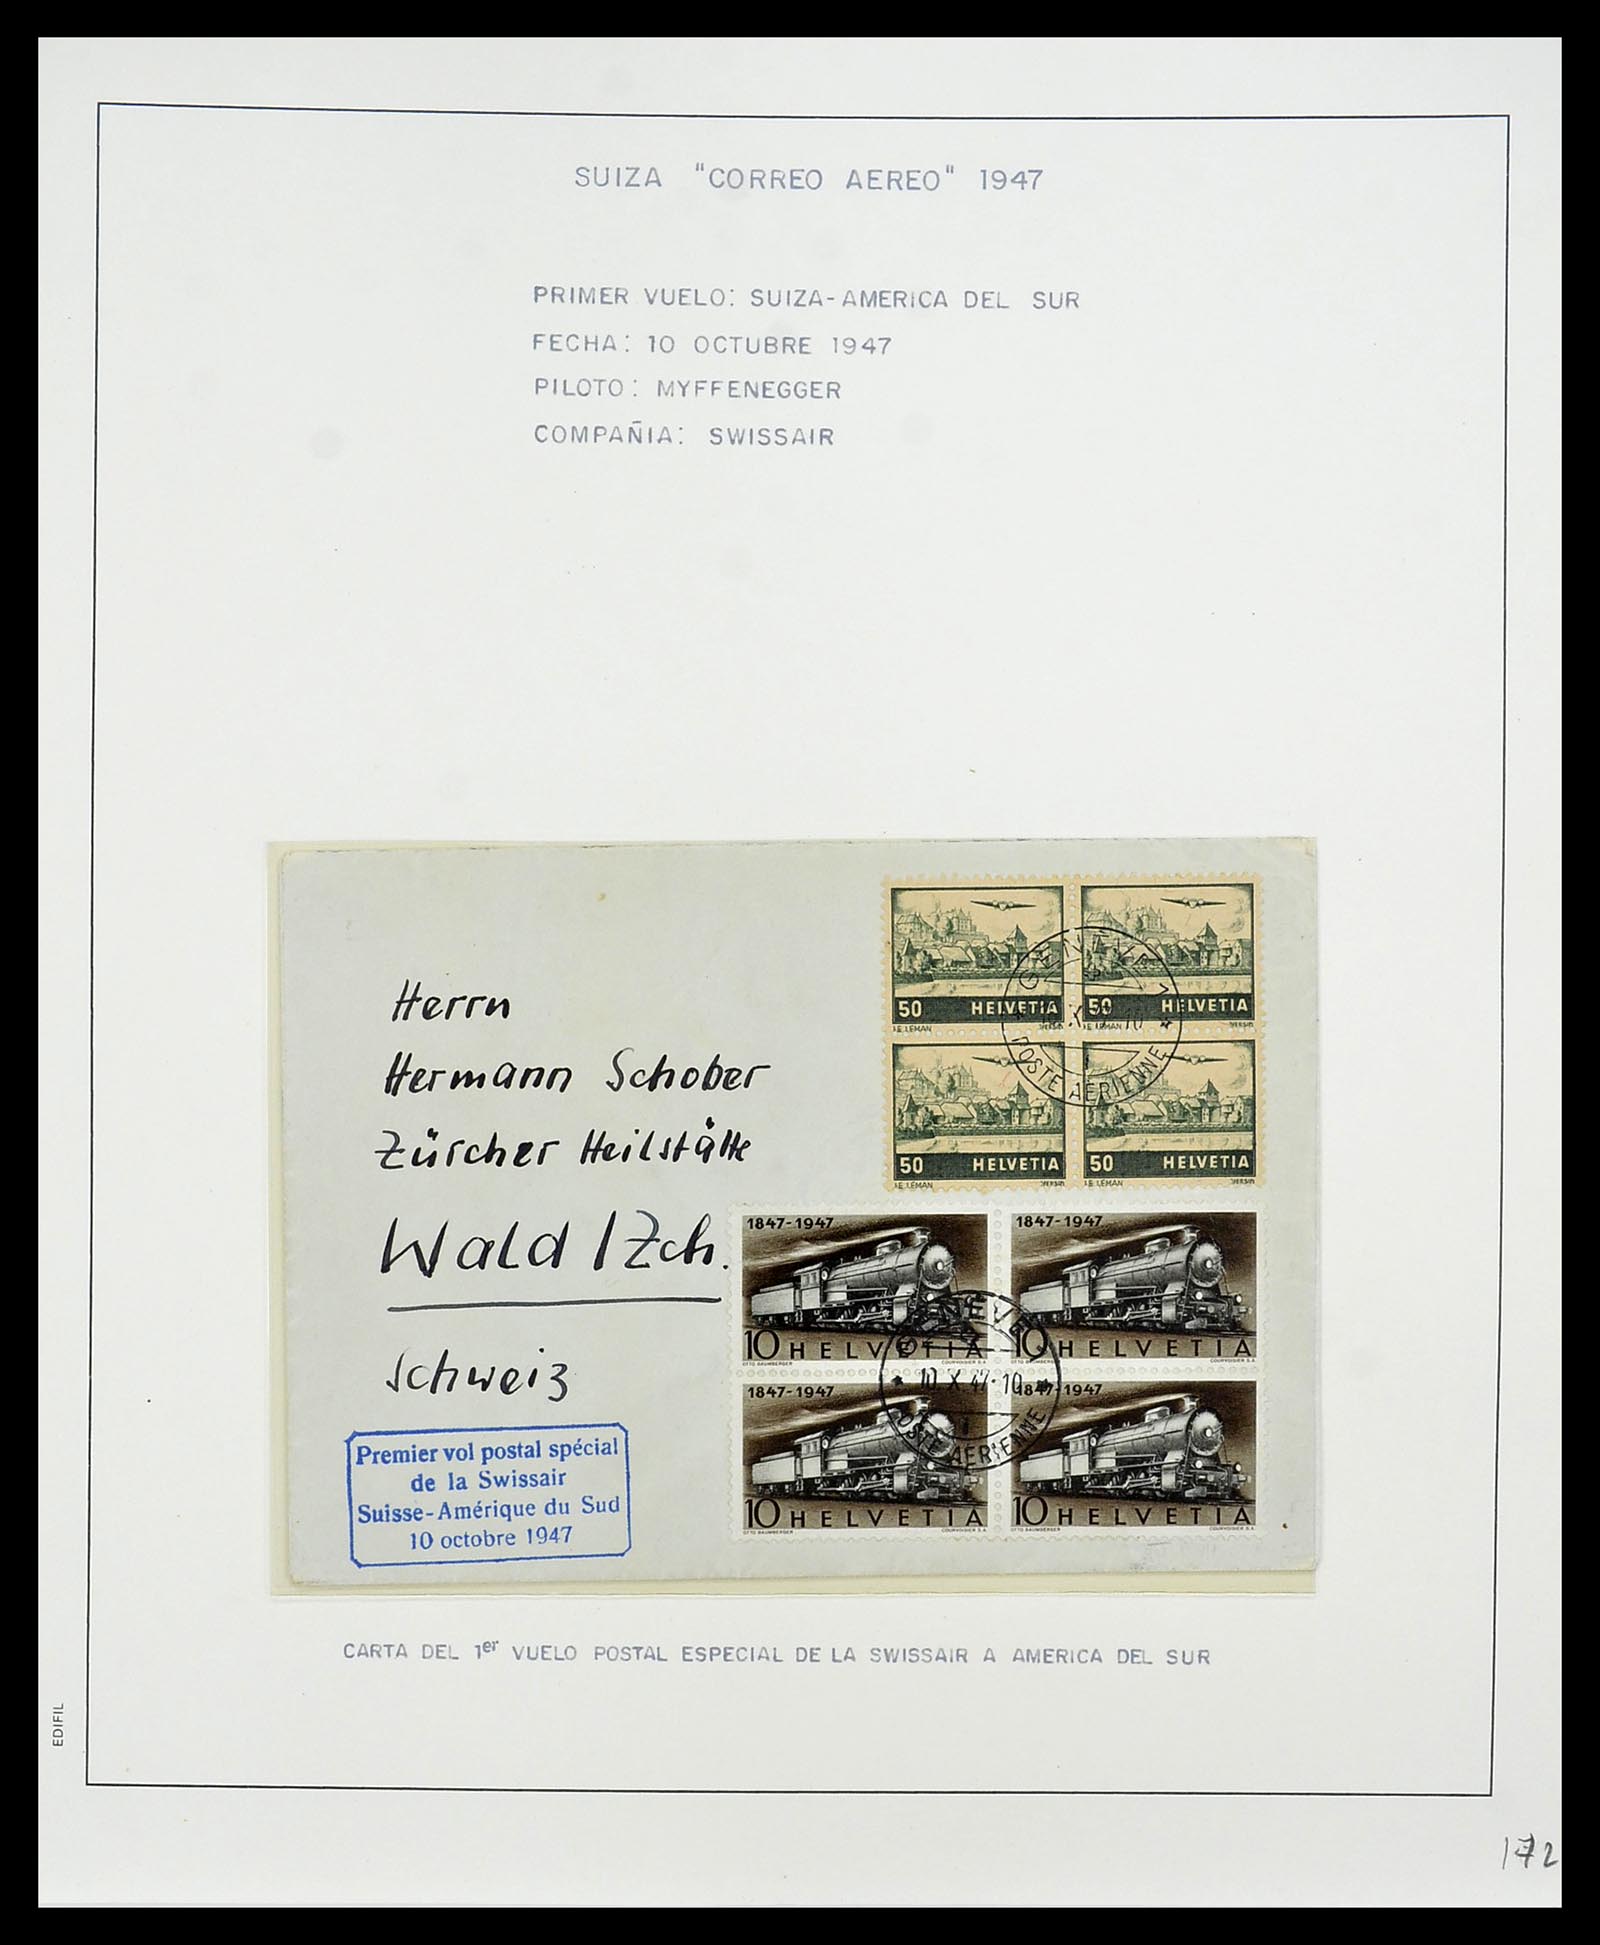 34137 046 - Stamp collection 34137 Switzerland airmail covers 1923-1963.